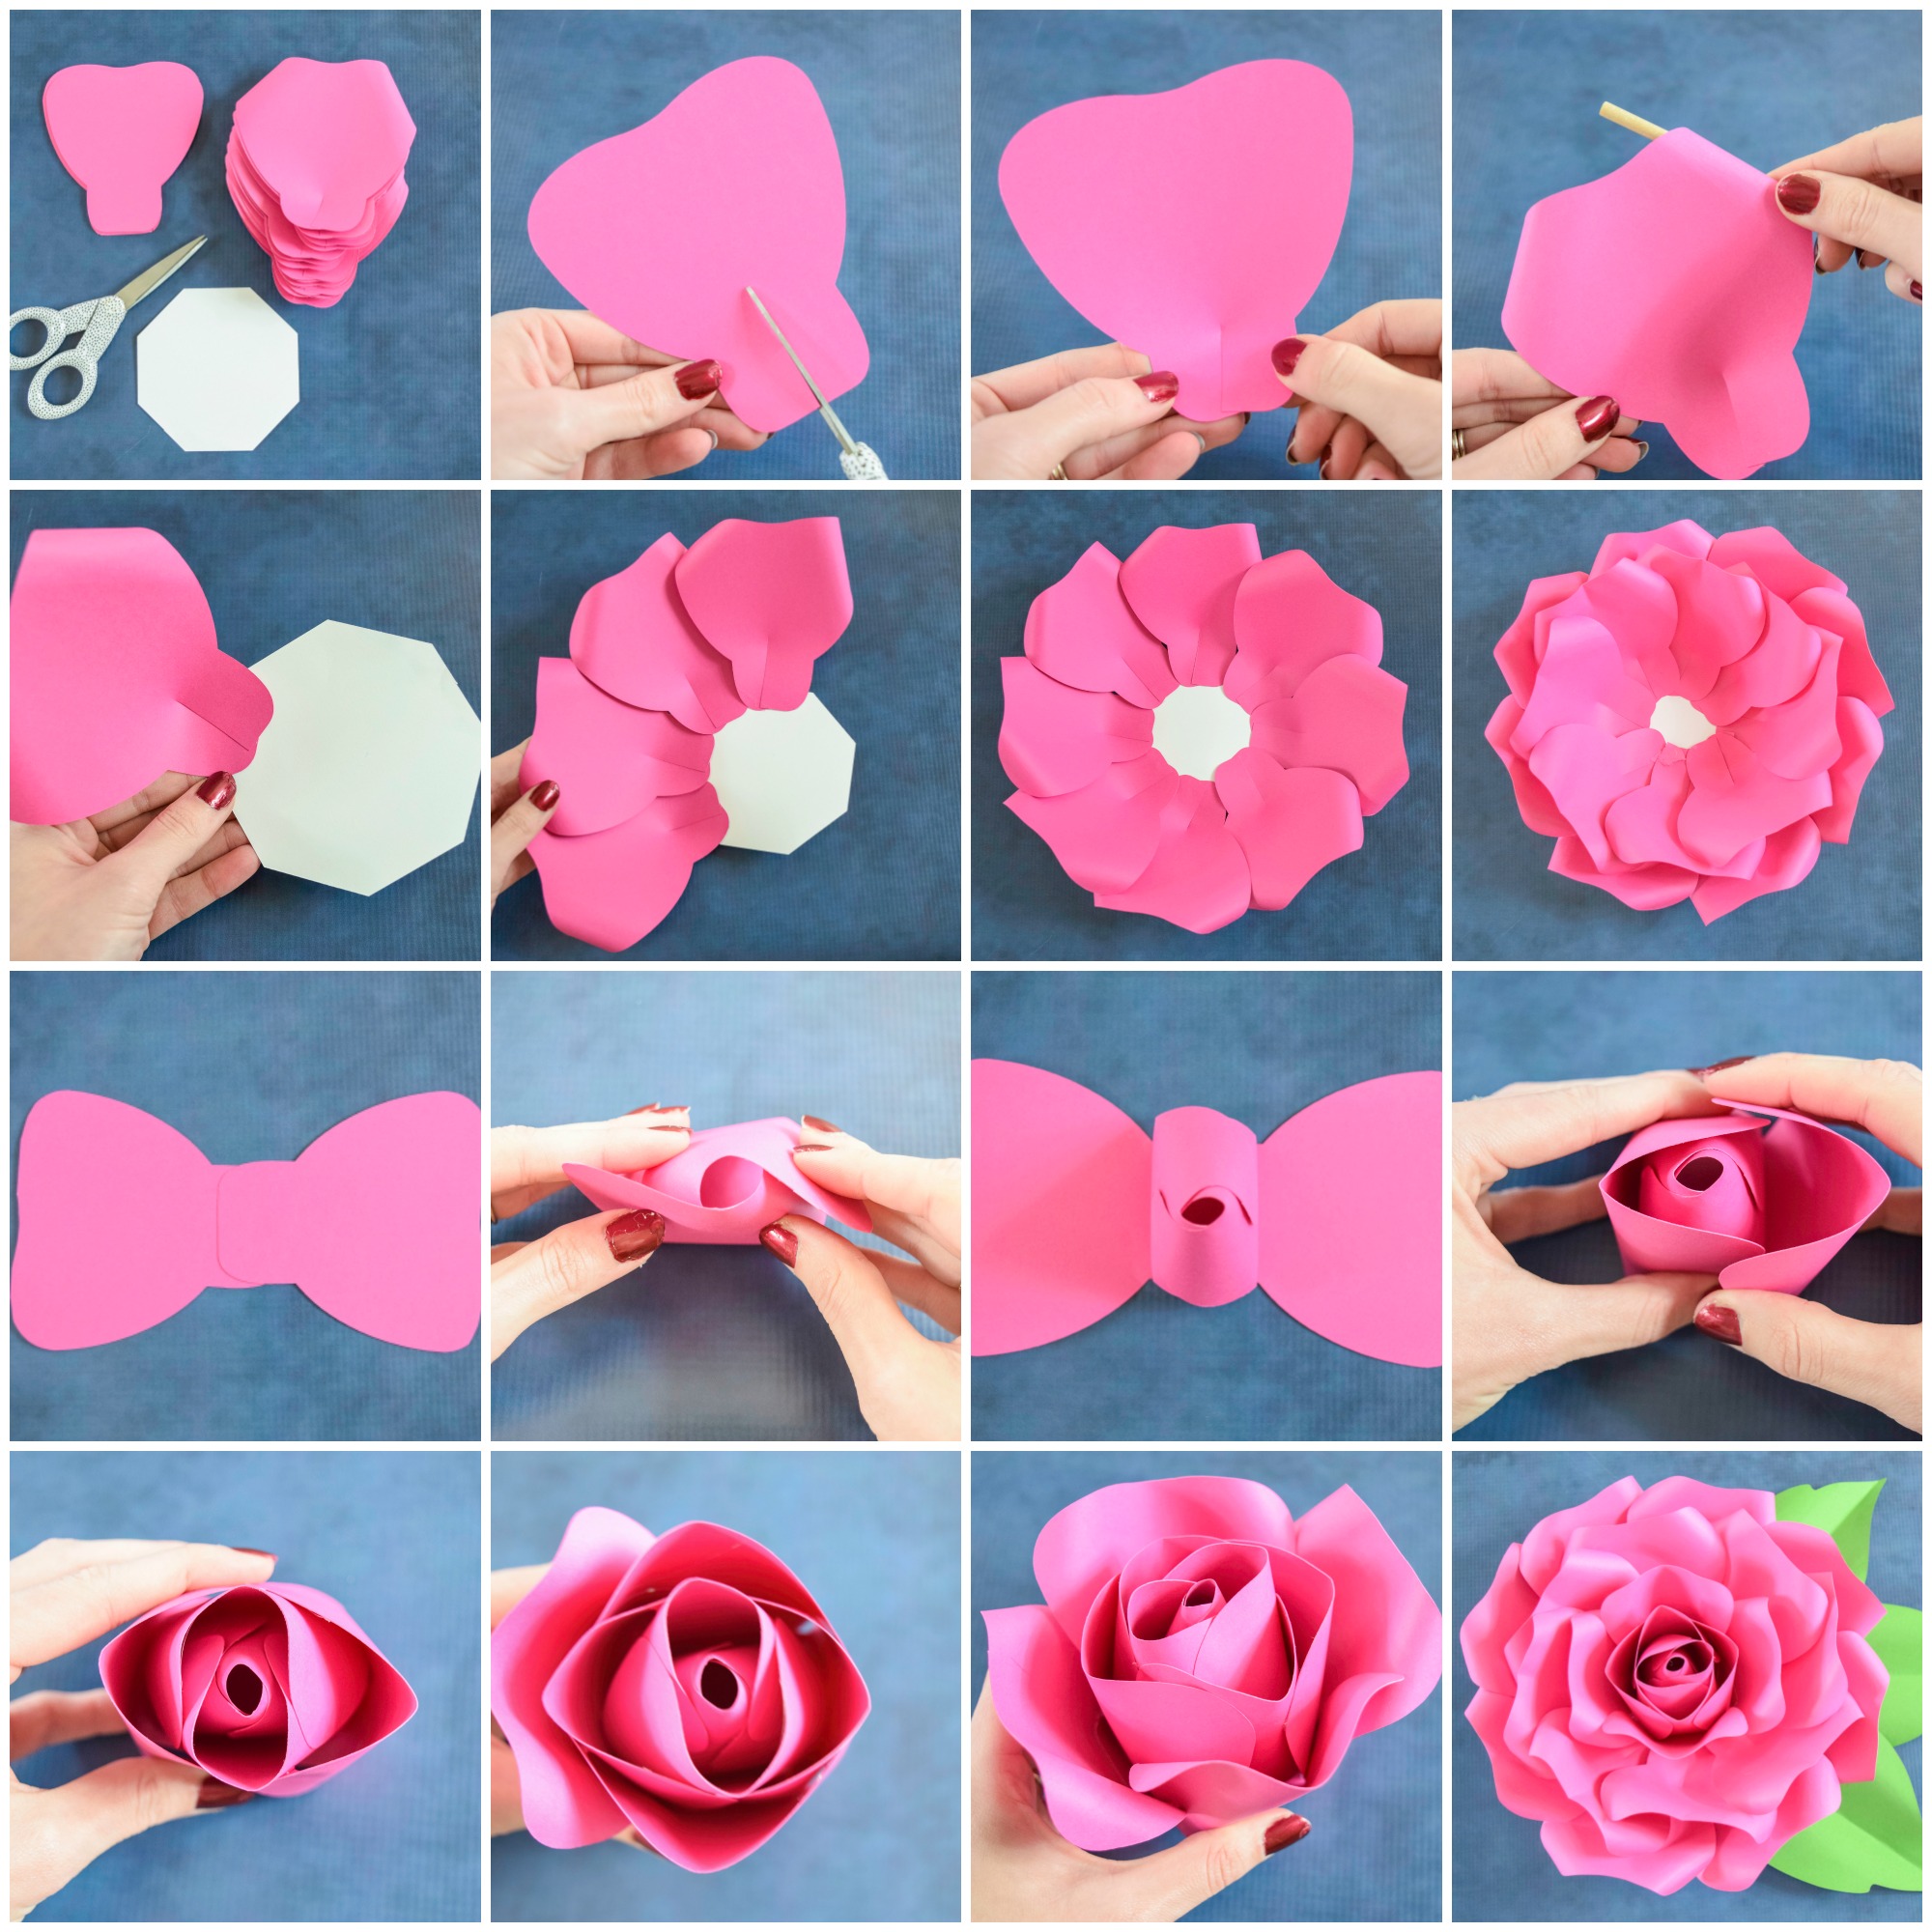 Giant Paper Flowers-How to Make Paper Garden Roses with Step by Step